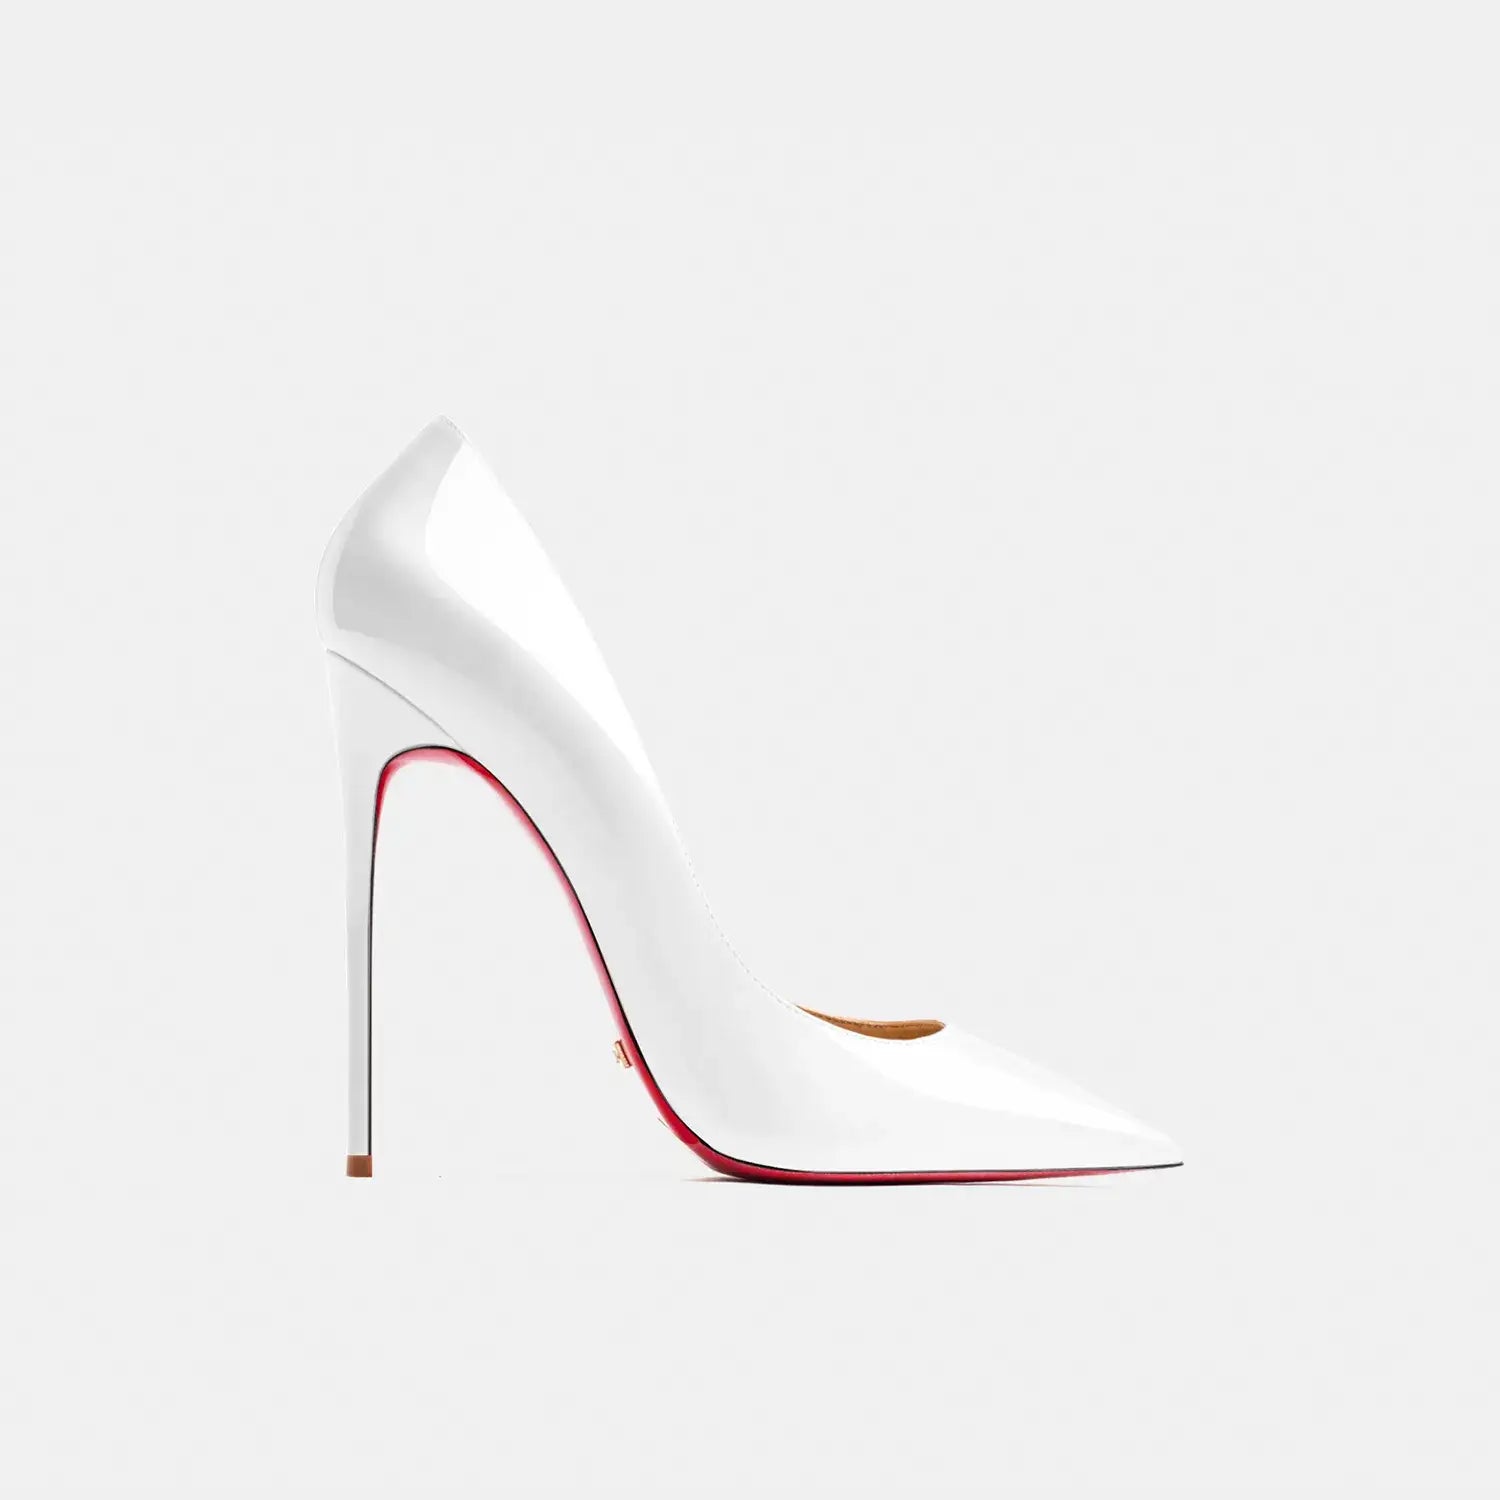 Real leather classic pumps red bottom pointed toe high heels - white 12cm / 36